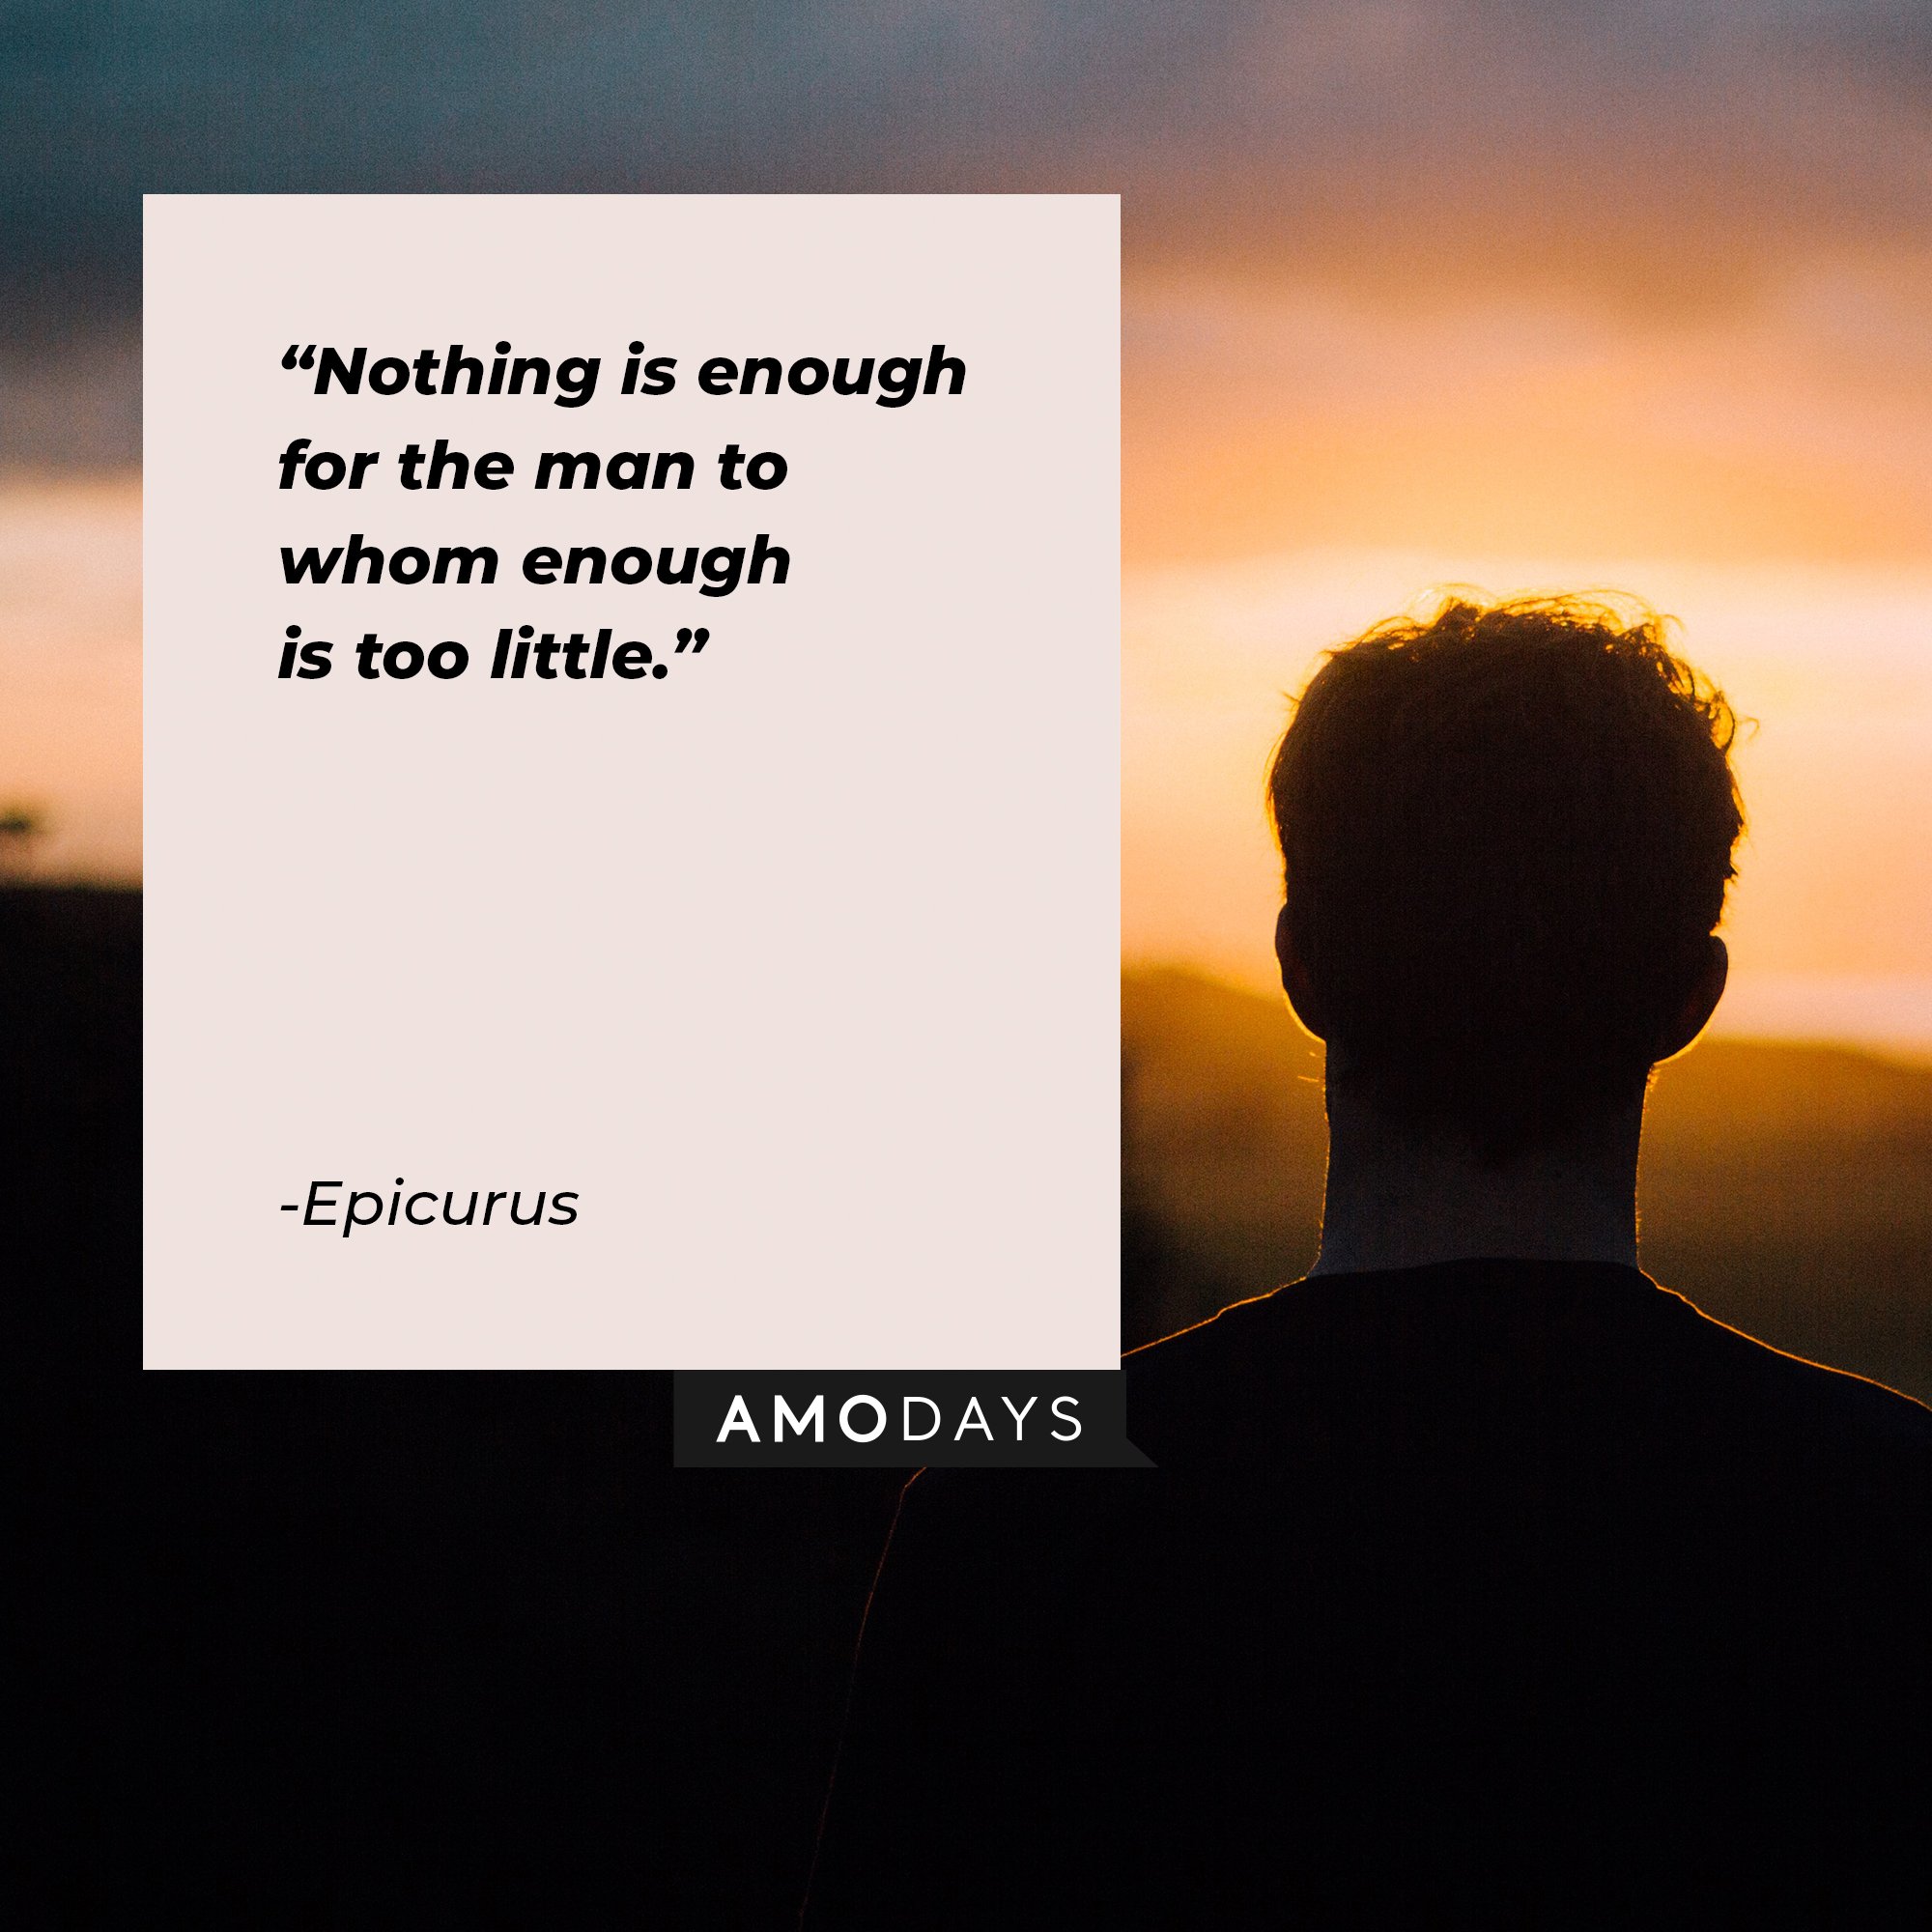 Epicurus’ quote: “Nothing is enough for the man to whom enough is too little.” | Image: AmoDays 